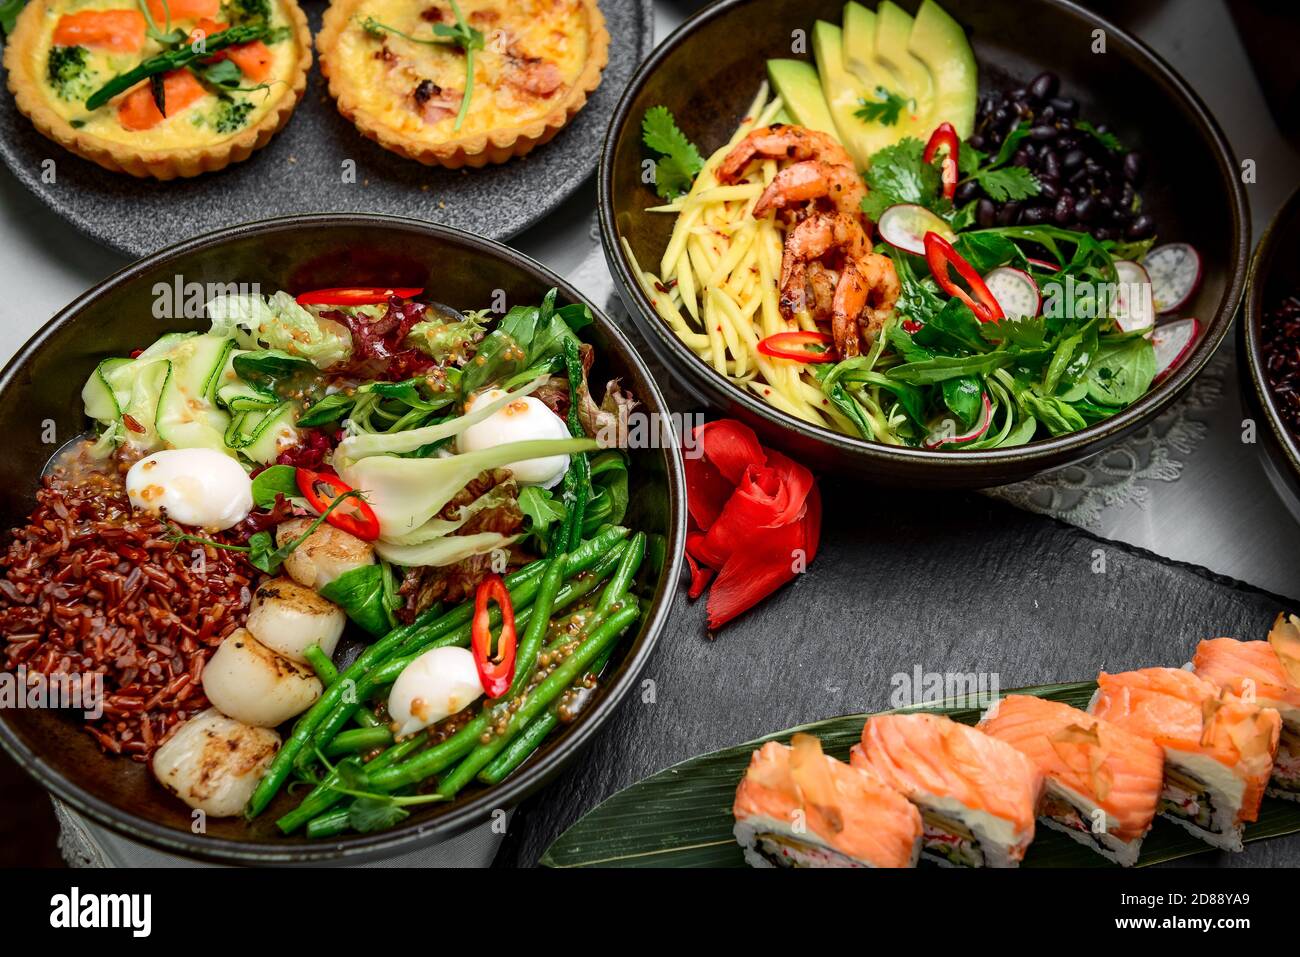 Mixed food, there are different dishes on the table Stock Photo